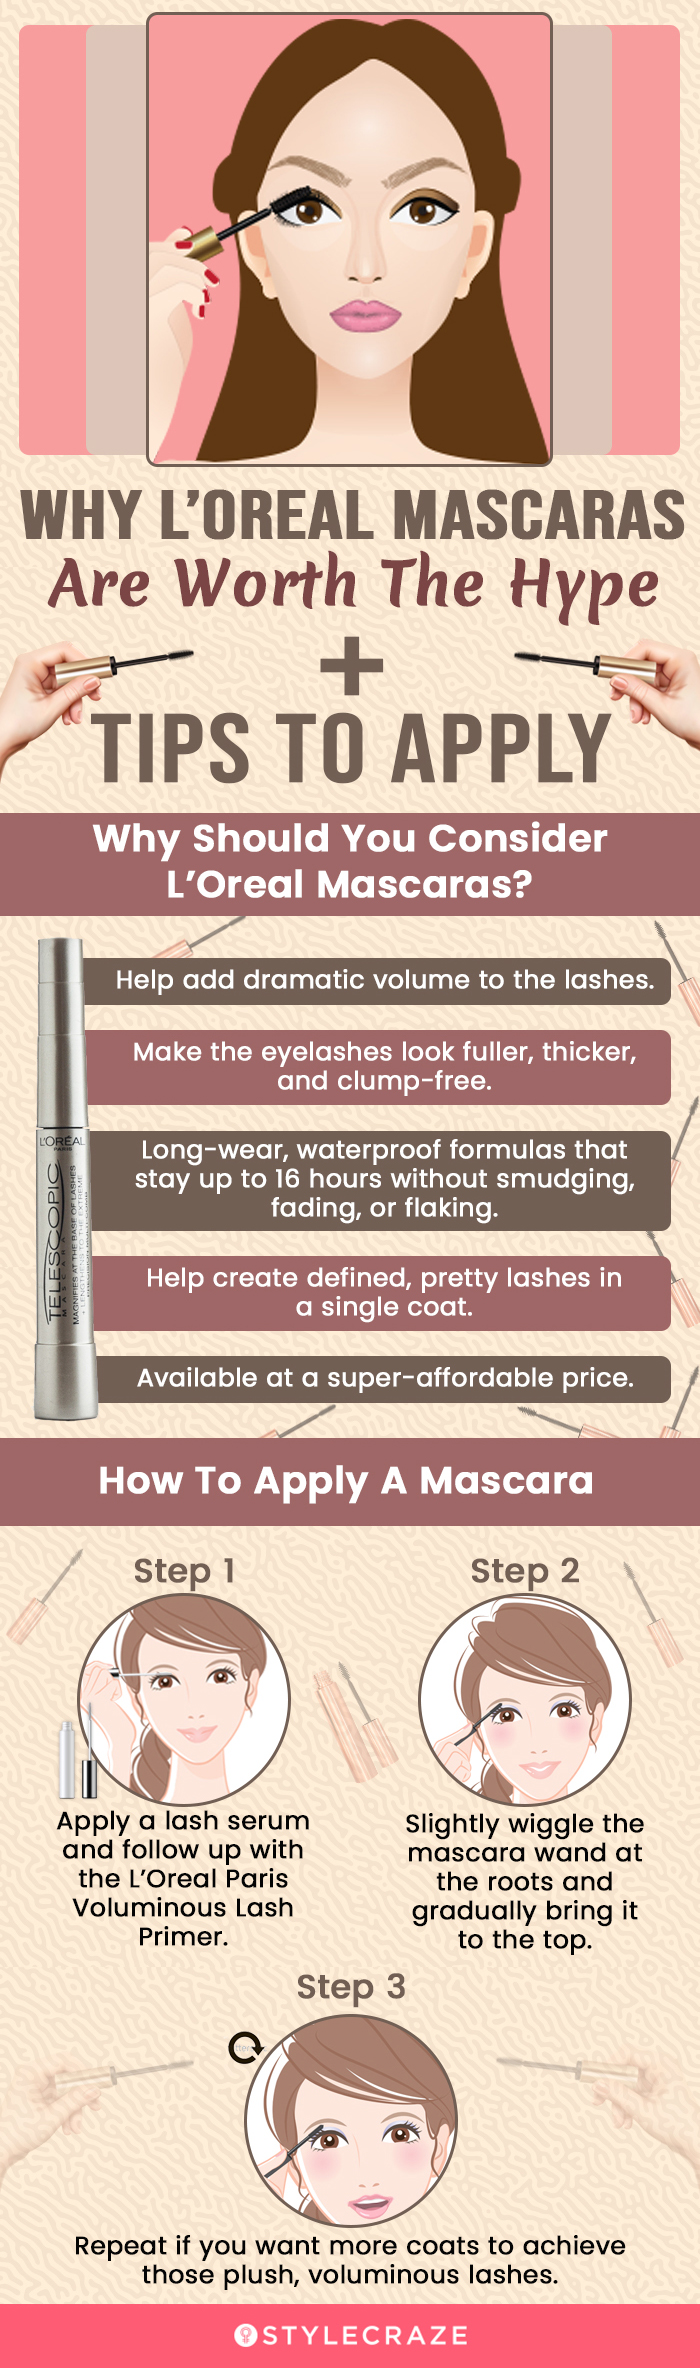 Why L’Oreal Mascara Is Worth Every Bit Of The Hype & How You Can Apply It (infographic)